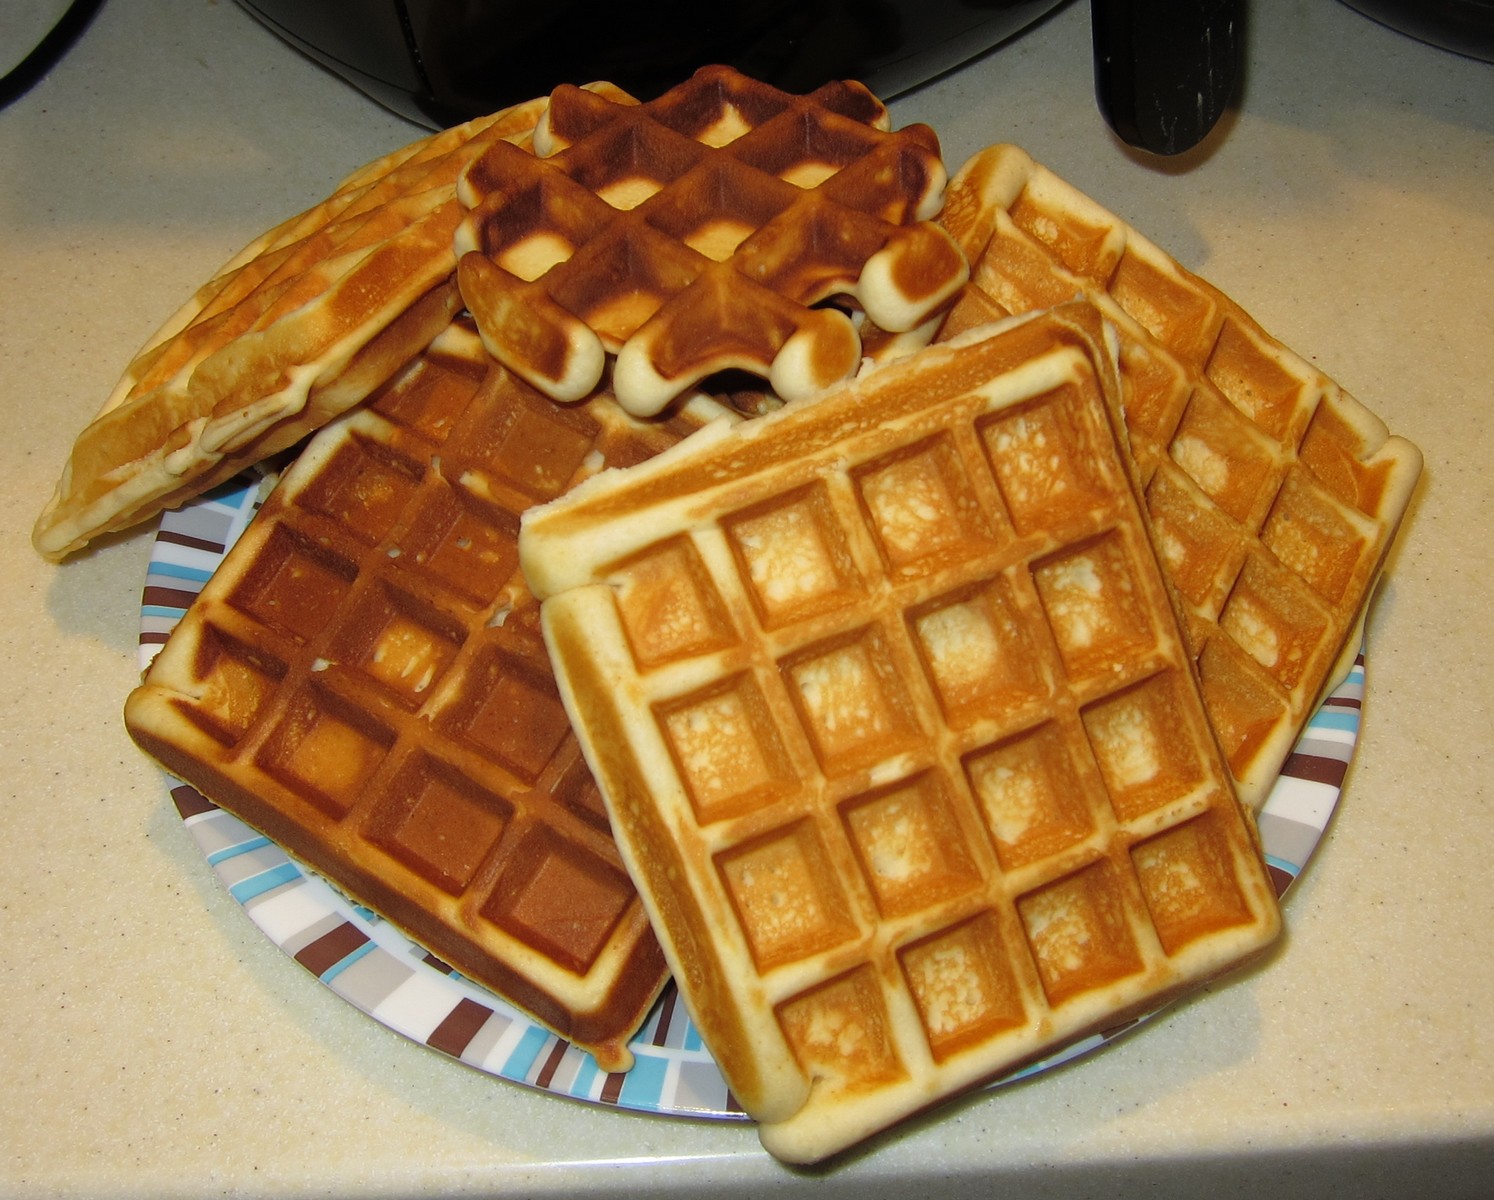 Thick waffles, crumbly on condensed milk